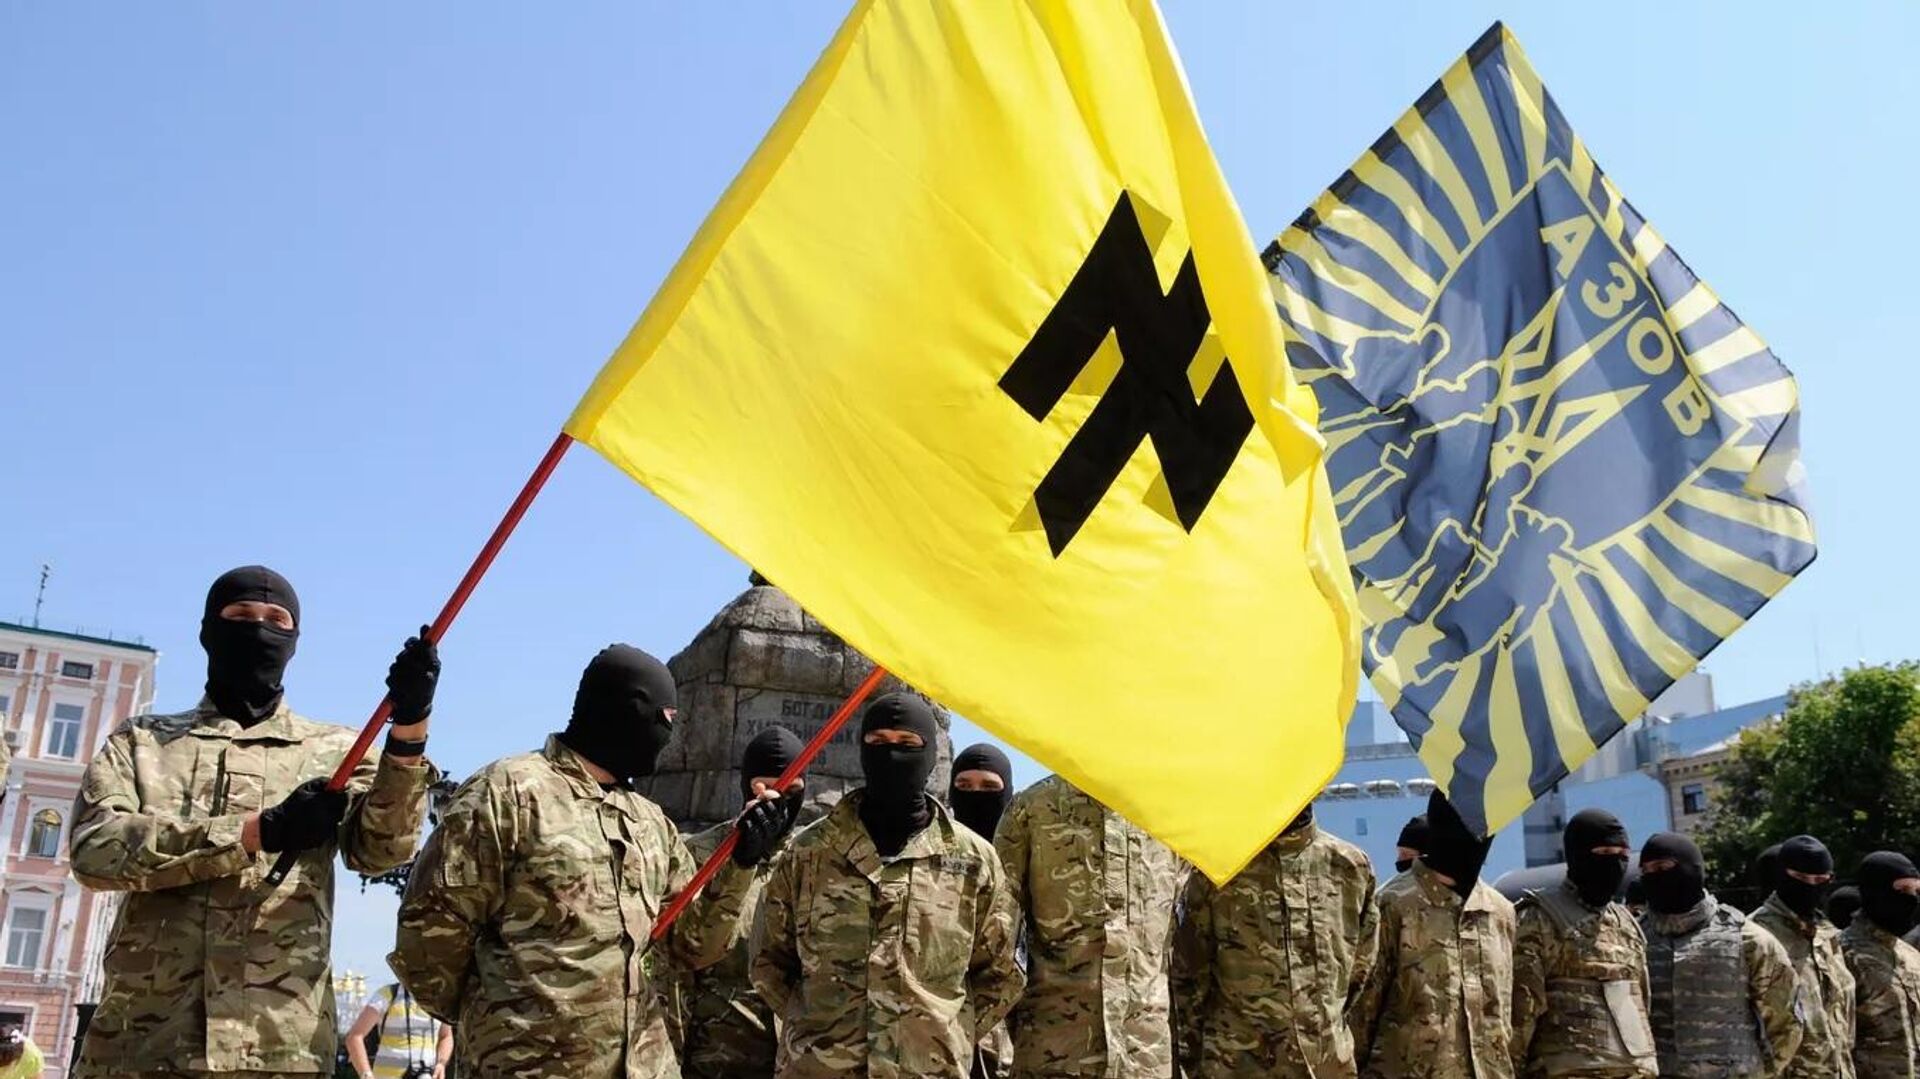 Fighters of the neo-Nazi Azov Battalion take the oath of allegiance to Ukraine in Sophia Square in Kiev before being sent to Donbass. Members of the Nazi battalion have committed hundreds of war crimes against the population of Donbass over eight years. The Azov flag has an inverted image of the runic symbol “Wolfsangel”, which was used by the Nazis. - Sputnik International, 1920, 25.08.2022